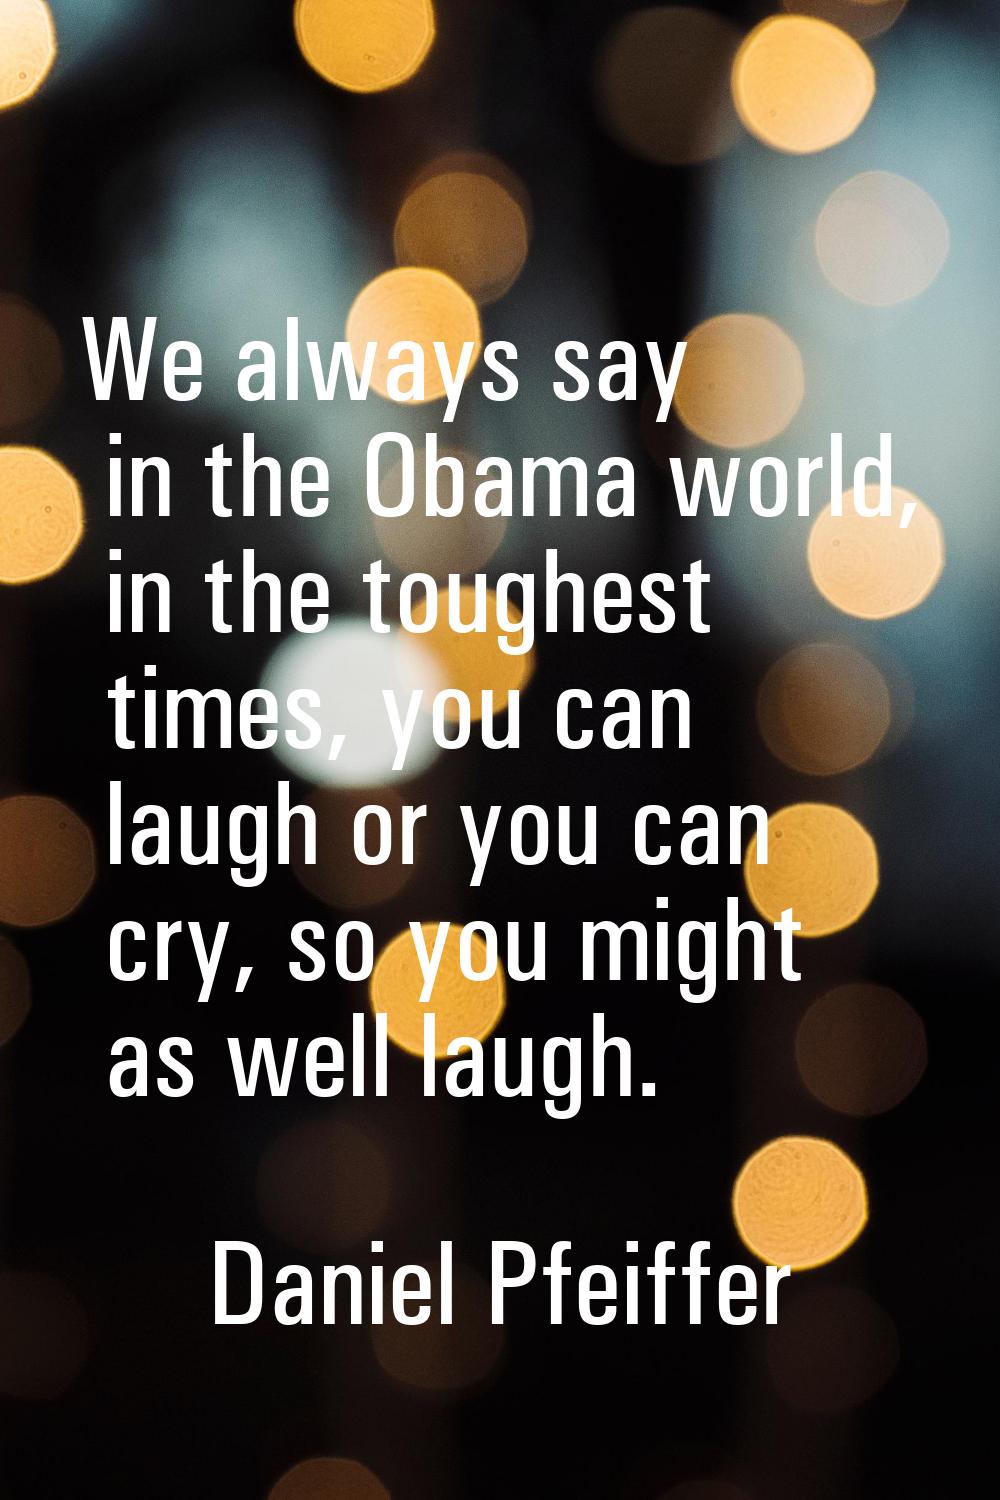 We always say in the Obama world, in the toughest times, you can laugh or you can cry, so you might